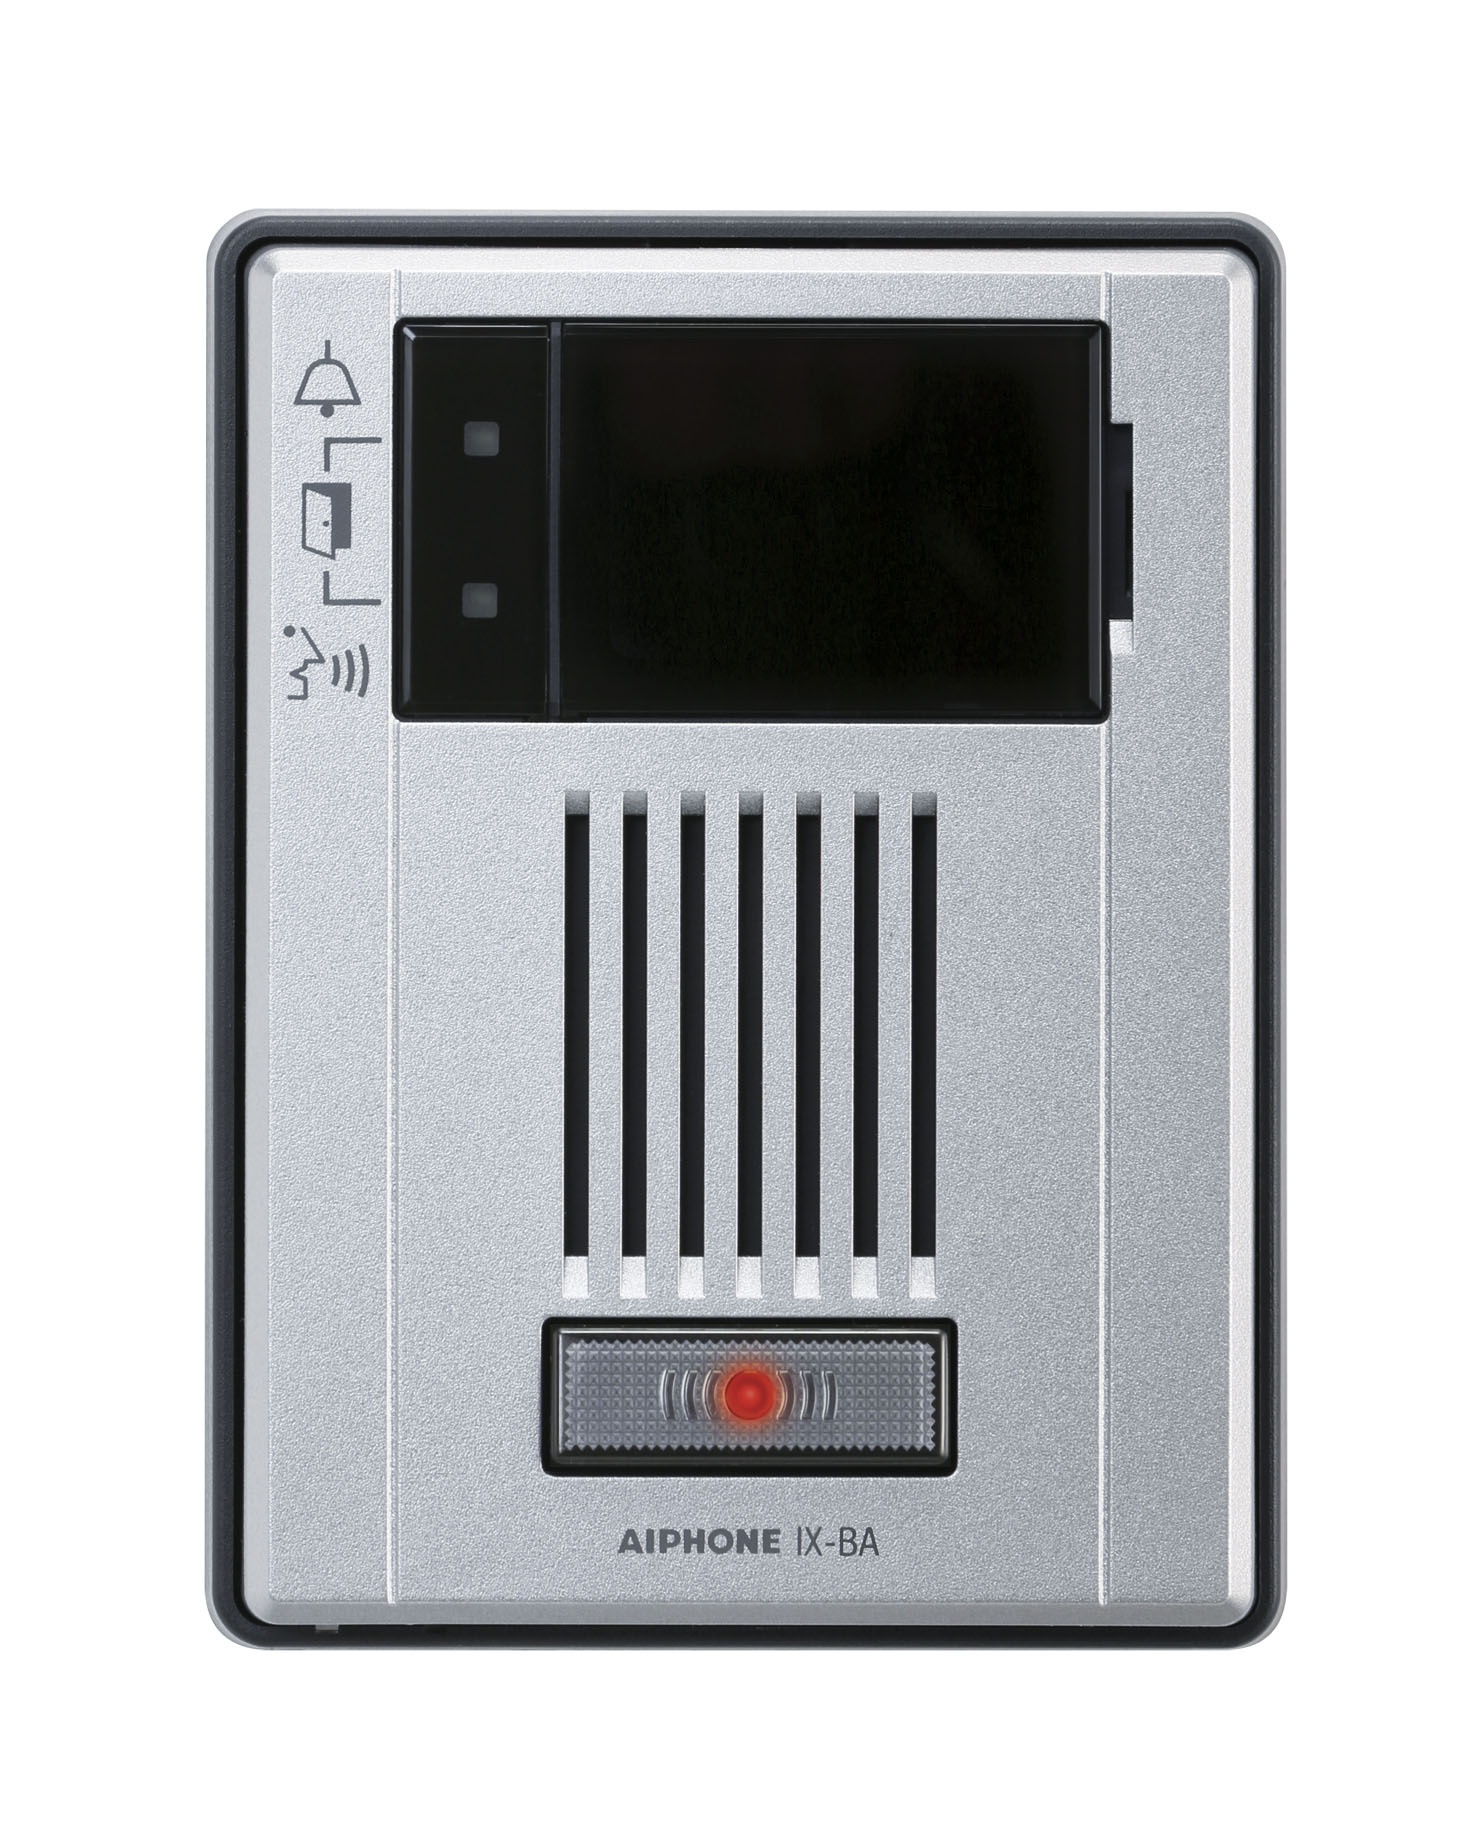 AIPHONE IX SERIES 2 IP INTERCOM 1 BUTTON AUDIO DOOR STATION SILVER COMMERCIAL MECHANICAL BUTTON PLASTIC 48V POE SWITCH